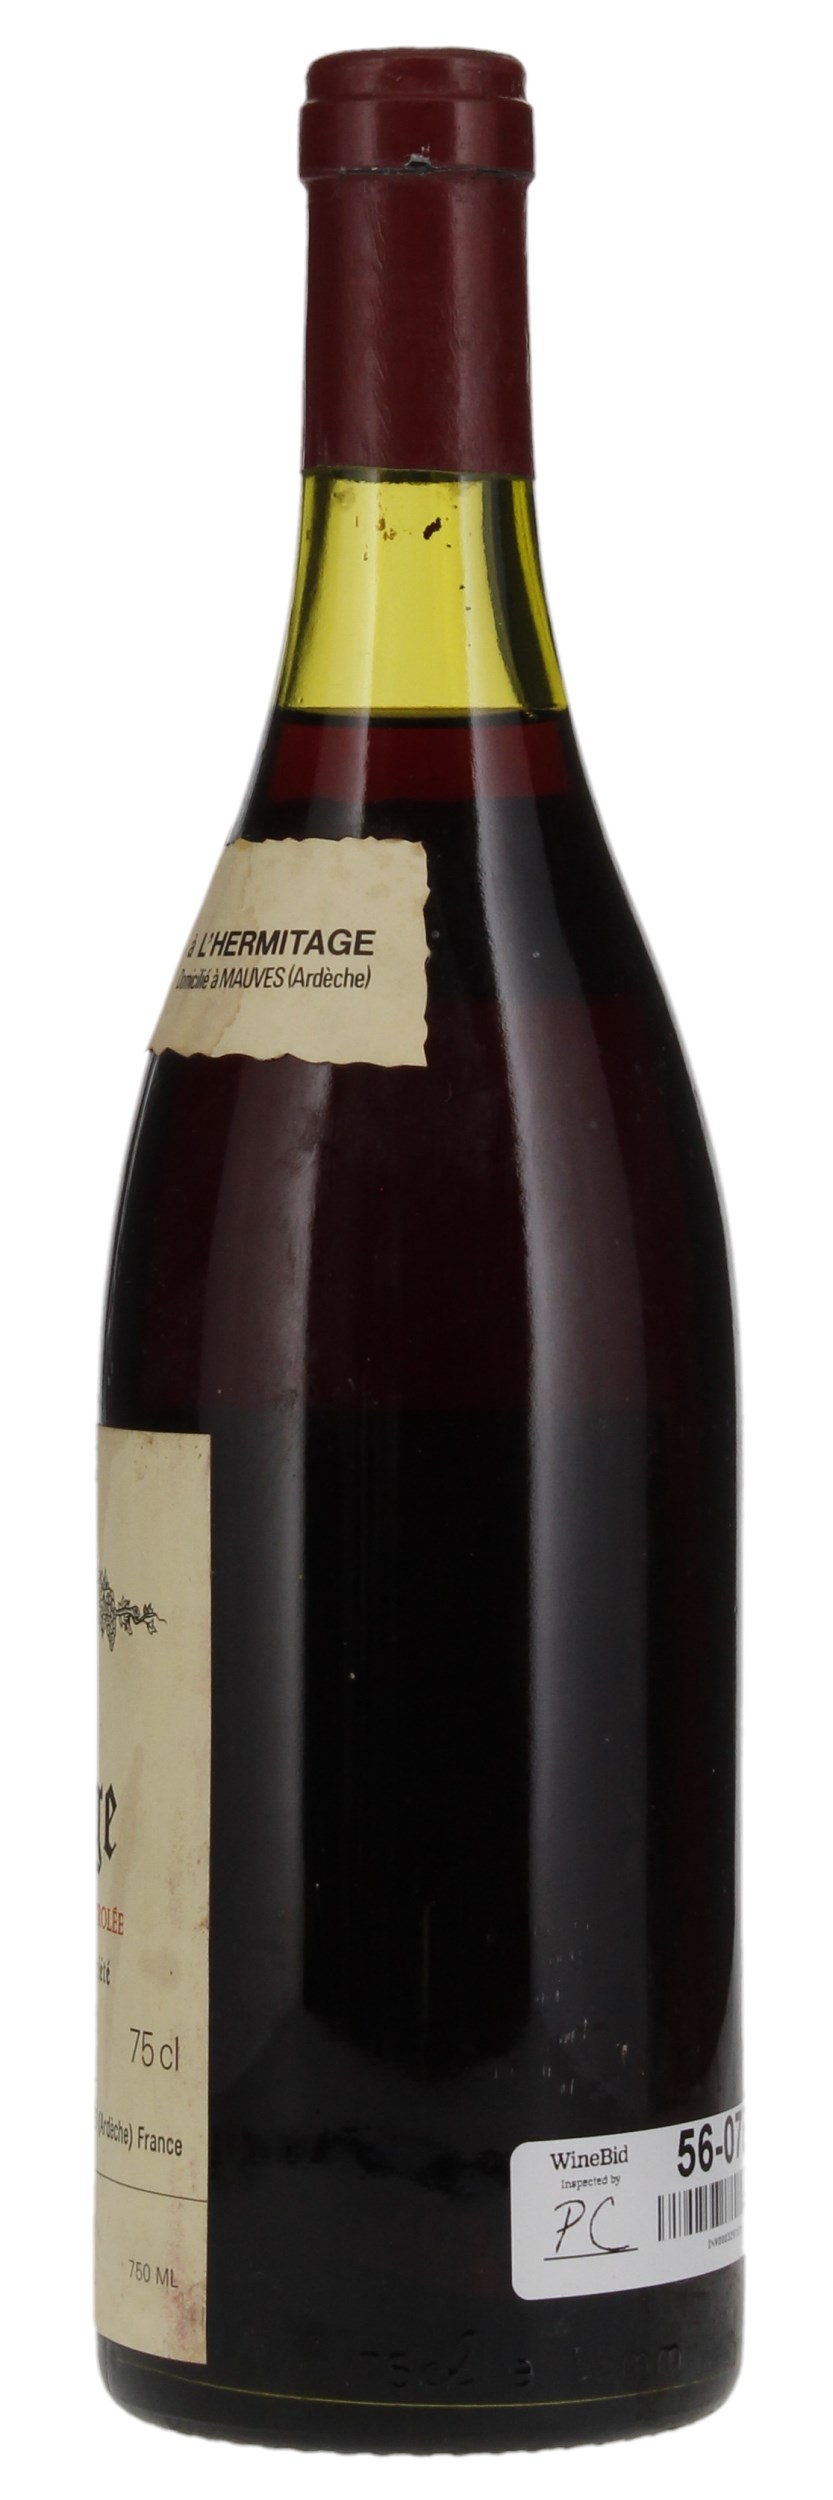 1982 Jean-Louis Chave Hermitage, 750ml